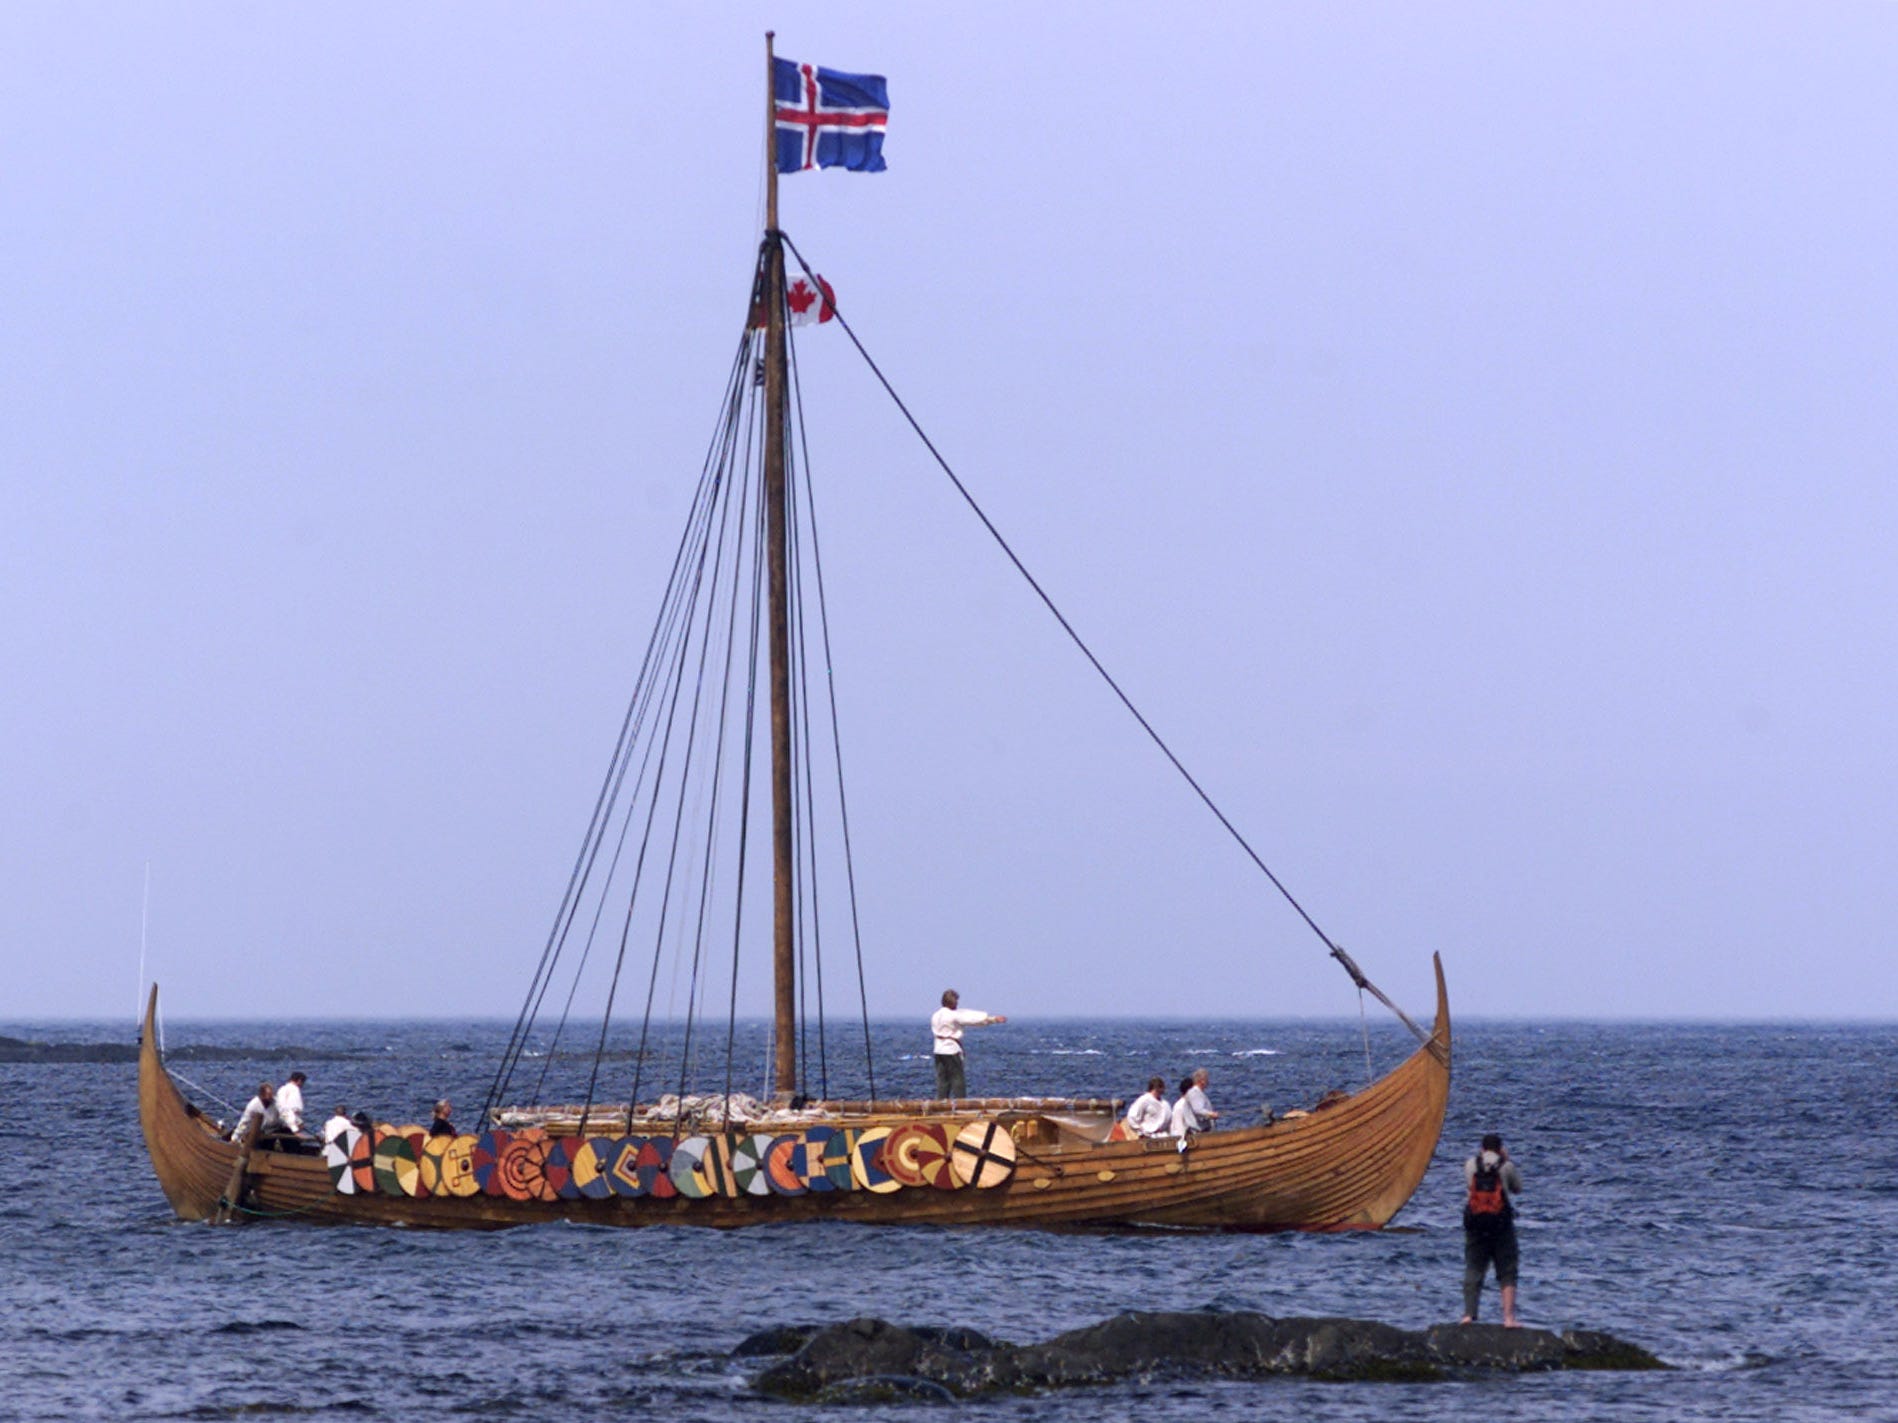 A tourist photographs the Viking replica ship the Islendingur as it arrives in the fishing village of L'Anse aux Meadows in Newfoundland July 28, 2000.